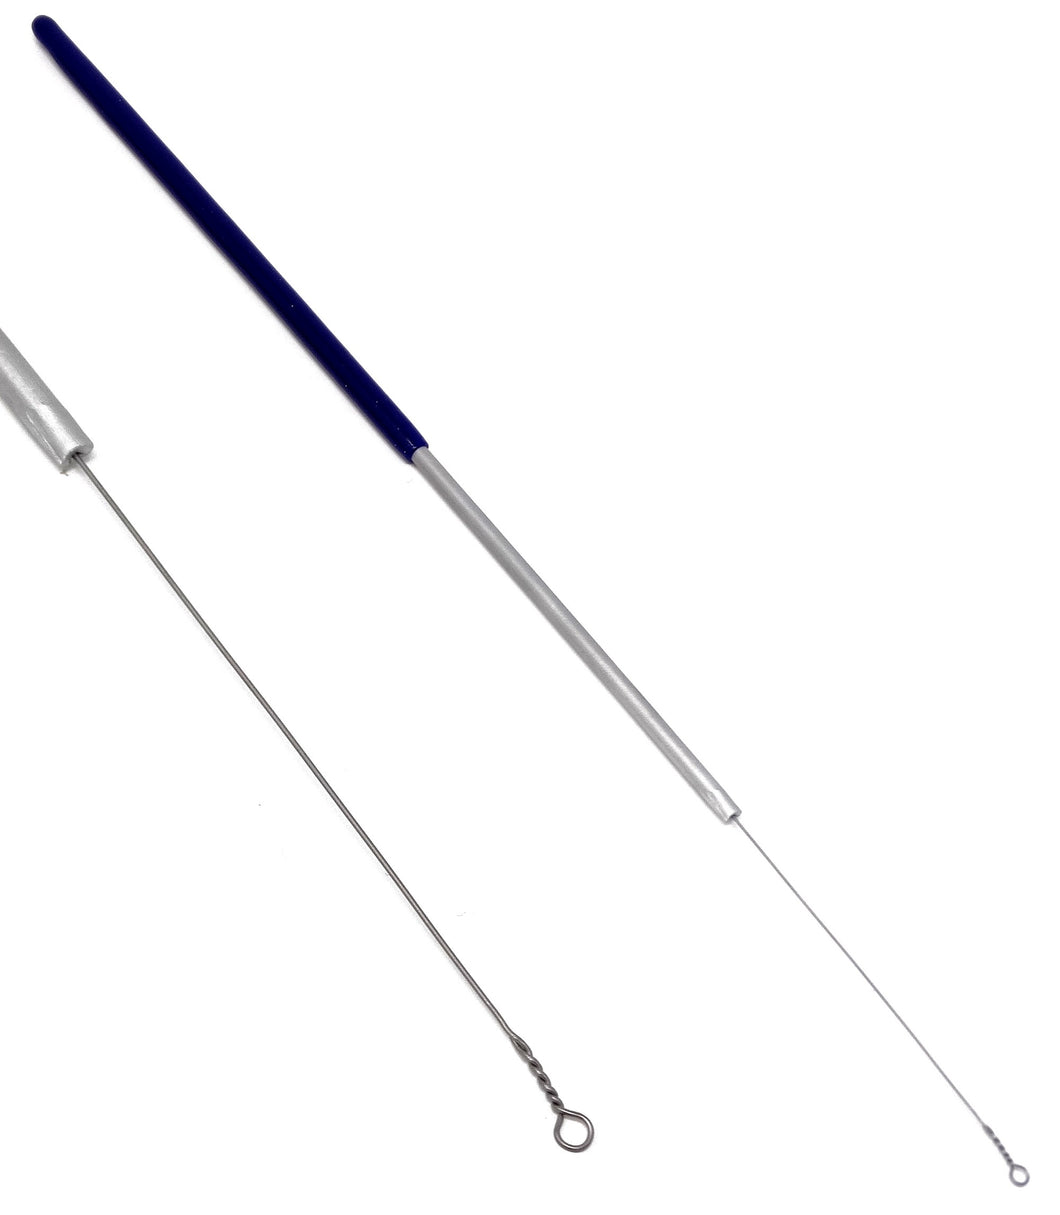 A2ZSCILAB Bacterial Inoculating Loop 2 mm, Single Nichrome Wire, With Insulated Aluminum Handle